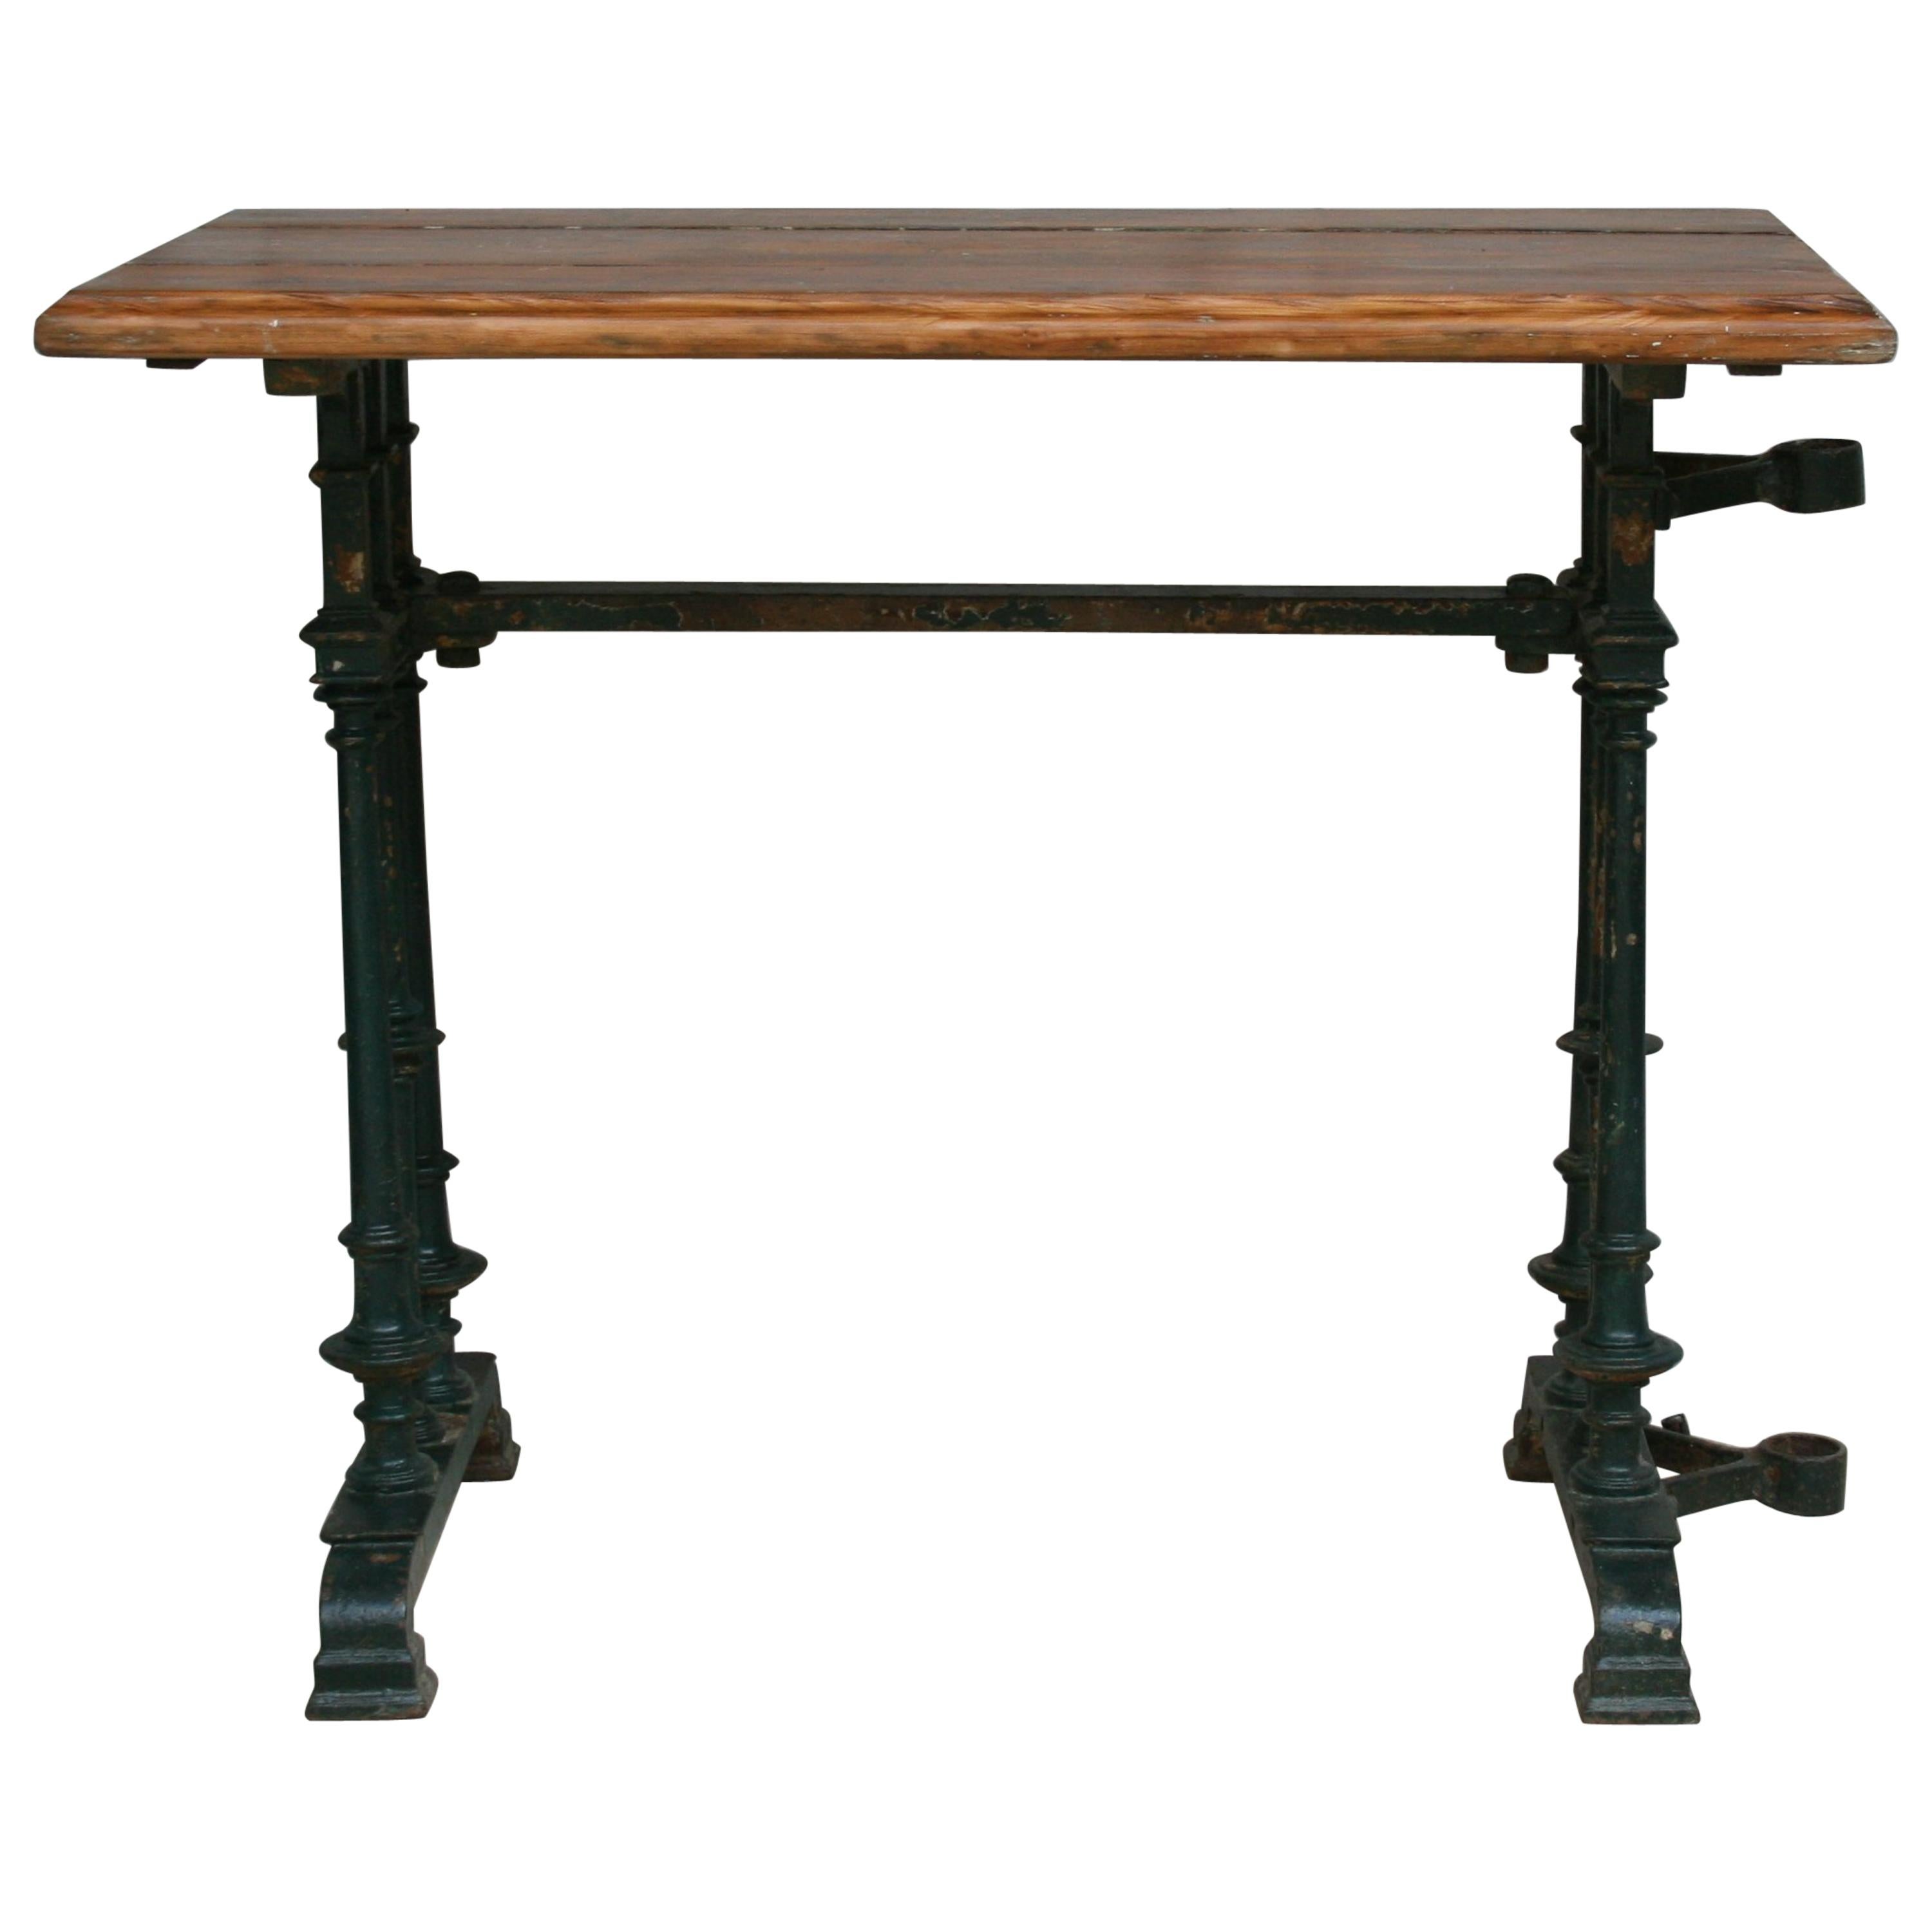 French Cast Iron Bistro Garden Table with Parasol-Holder, 19th Century